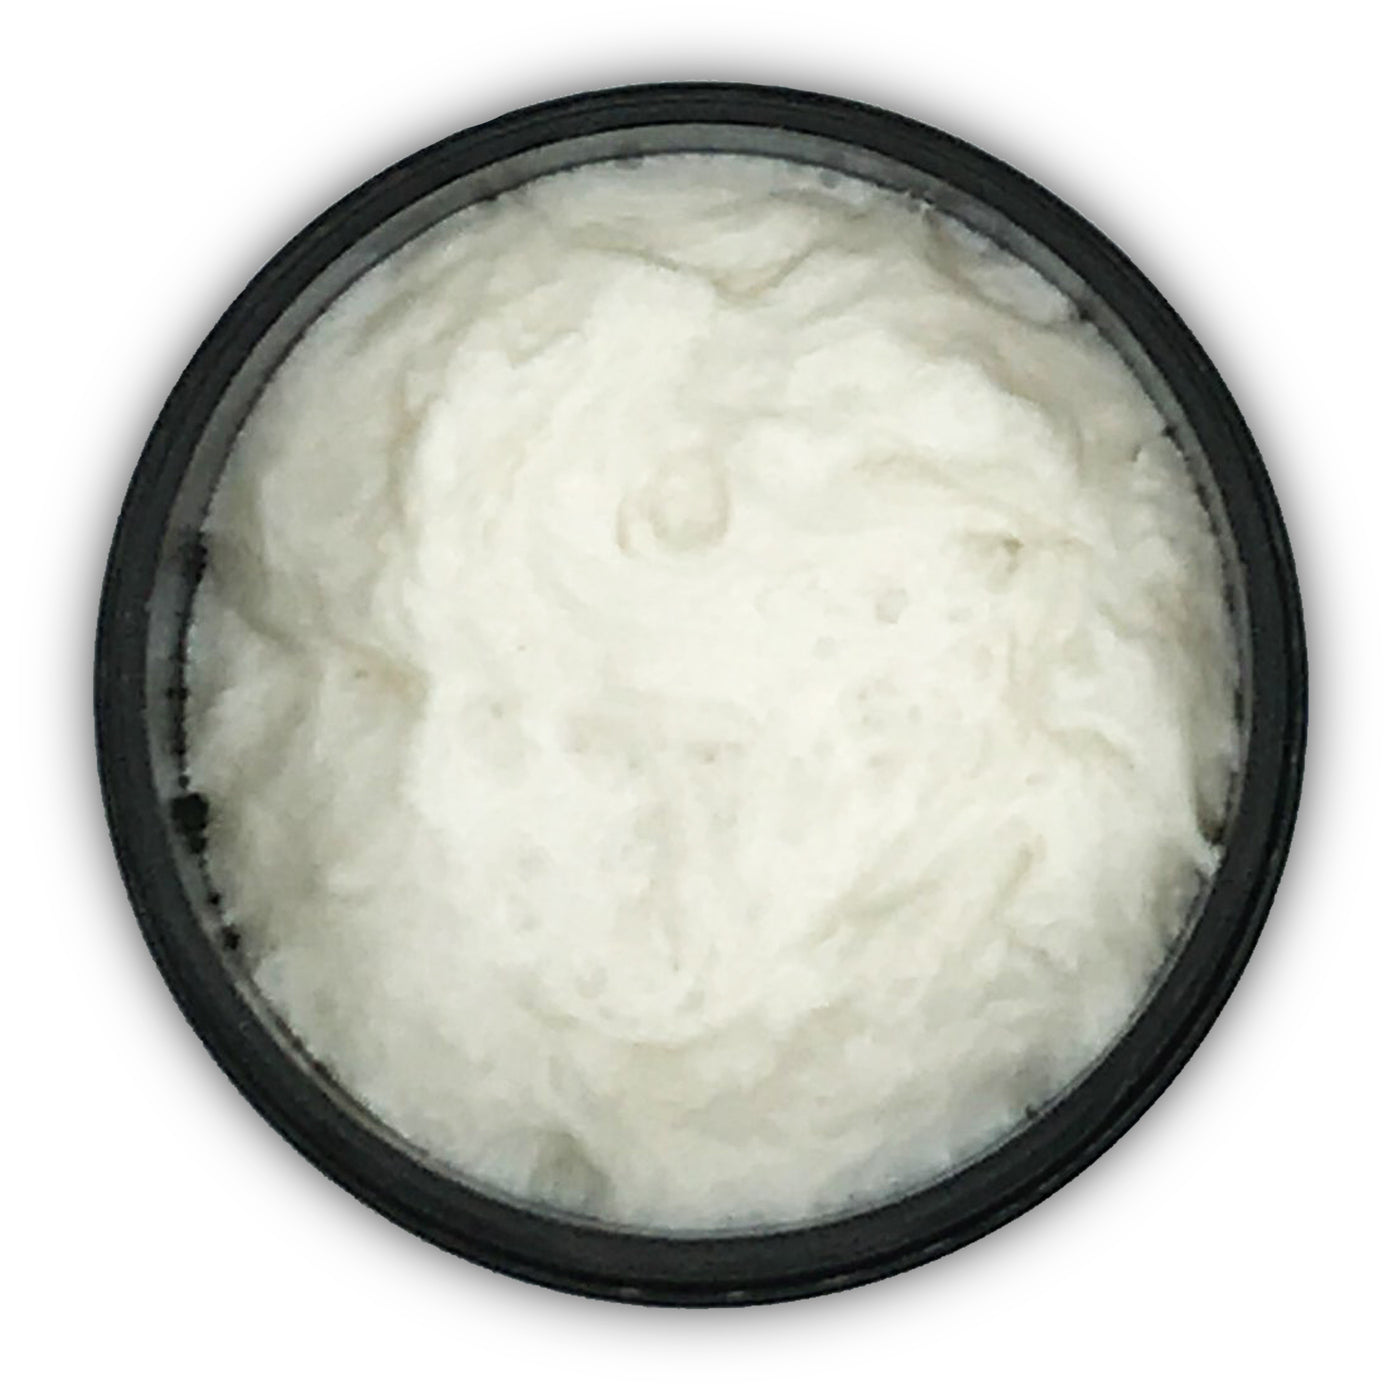  Hivernant Shaving Soap by Long Rifle sold by Naked Armor Razors